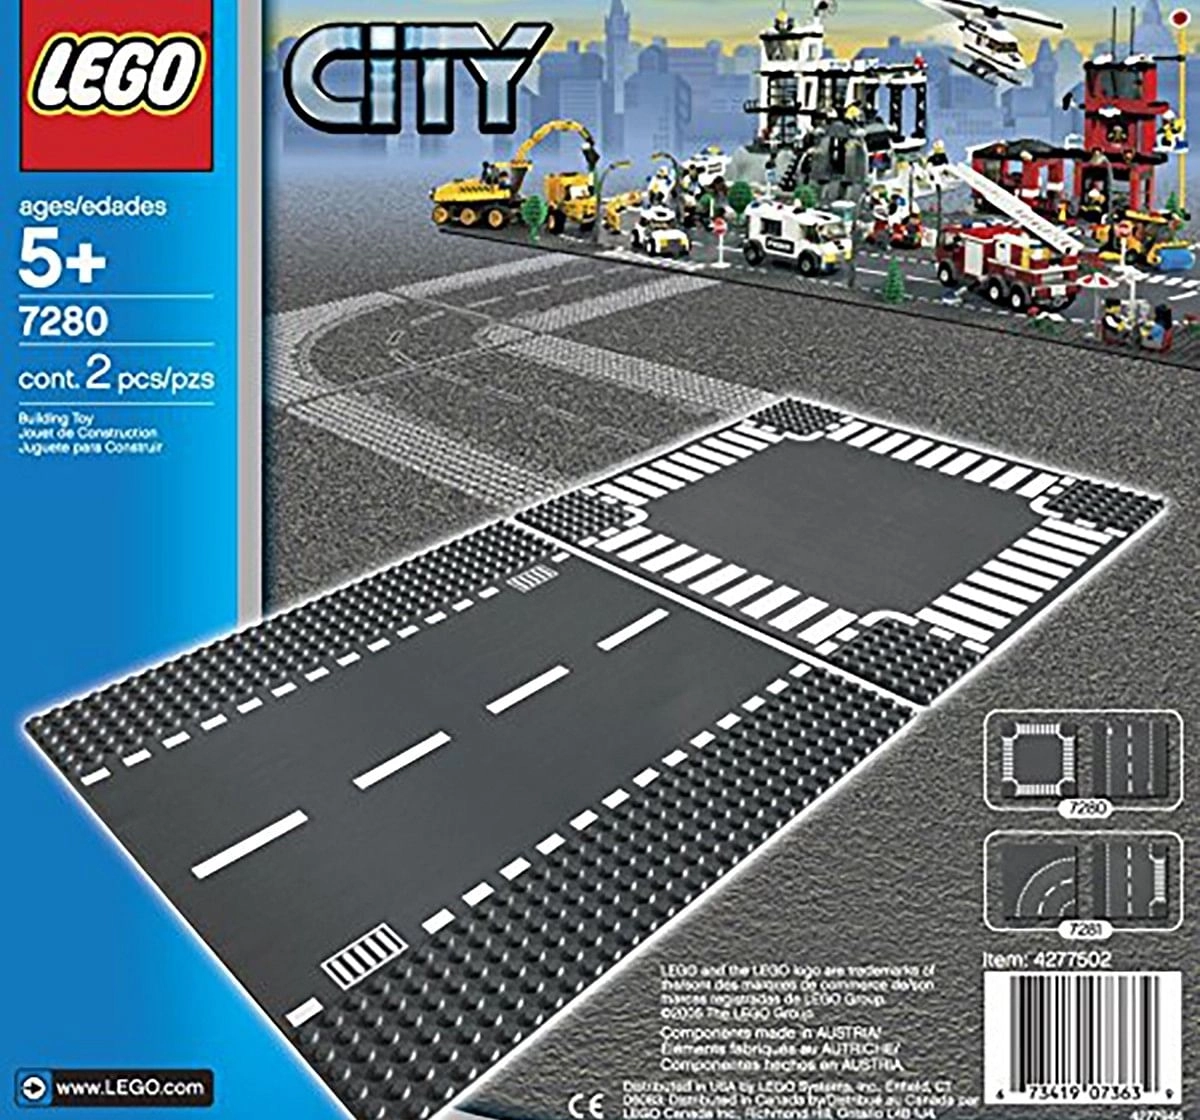  Lego 7280 City Town Straight And Crossroad Plate Building Kit, Multi Color Blocks for Kids age 5Y+ (Black)